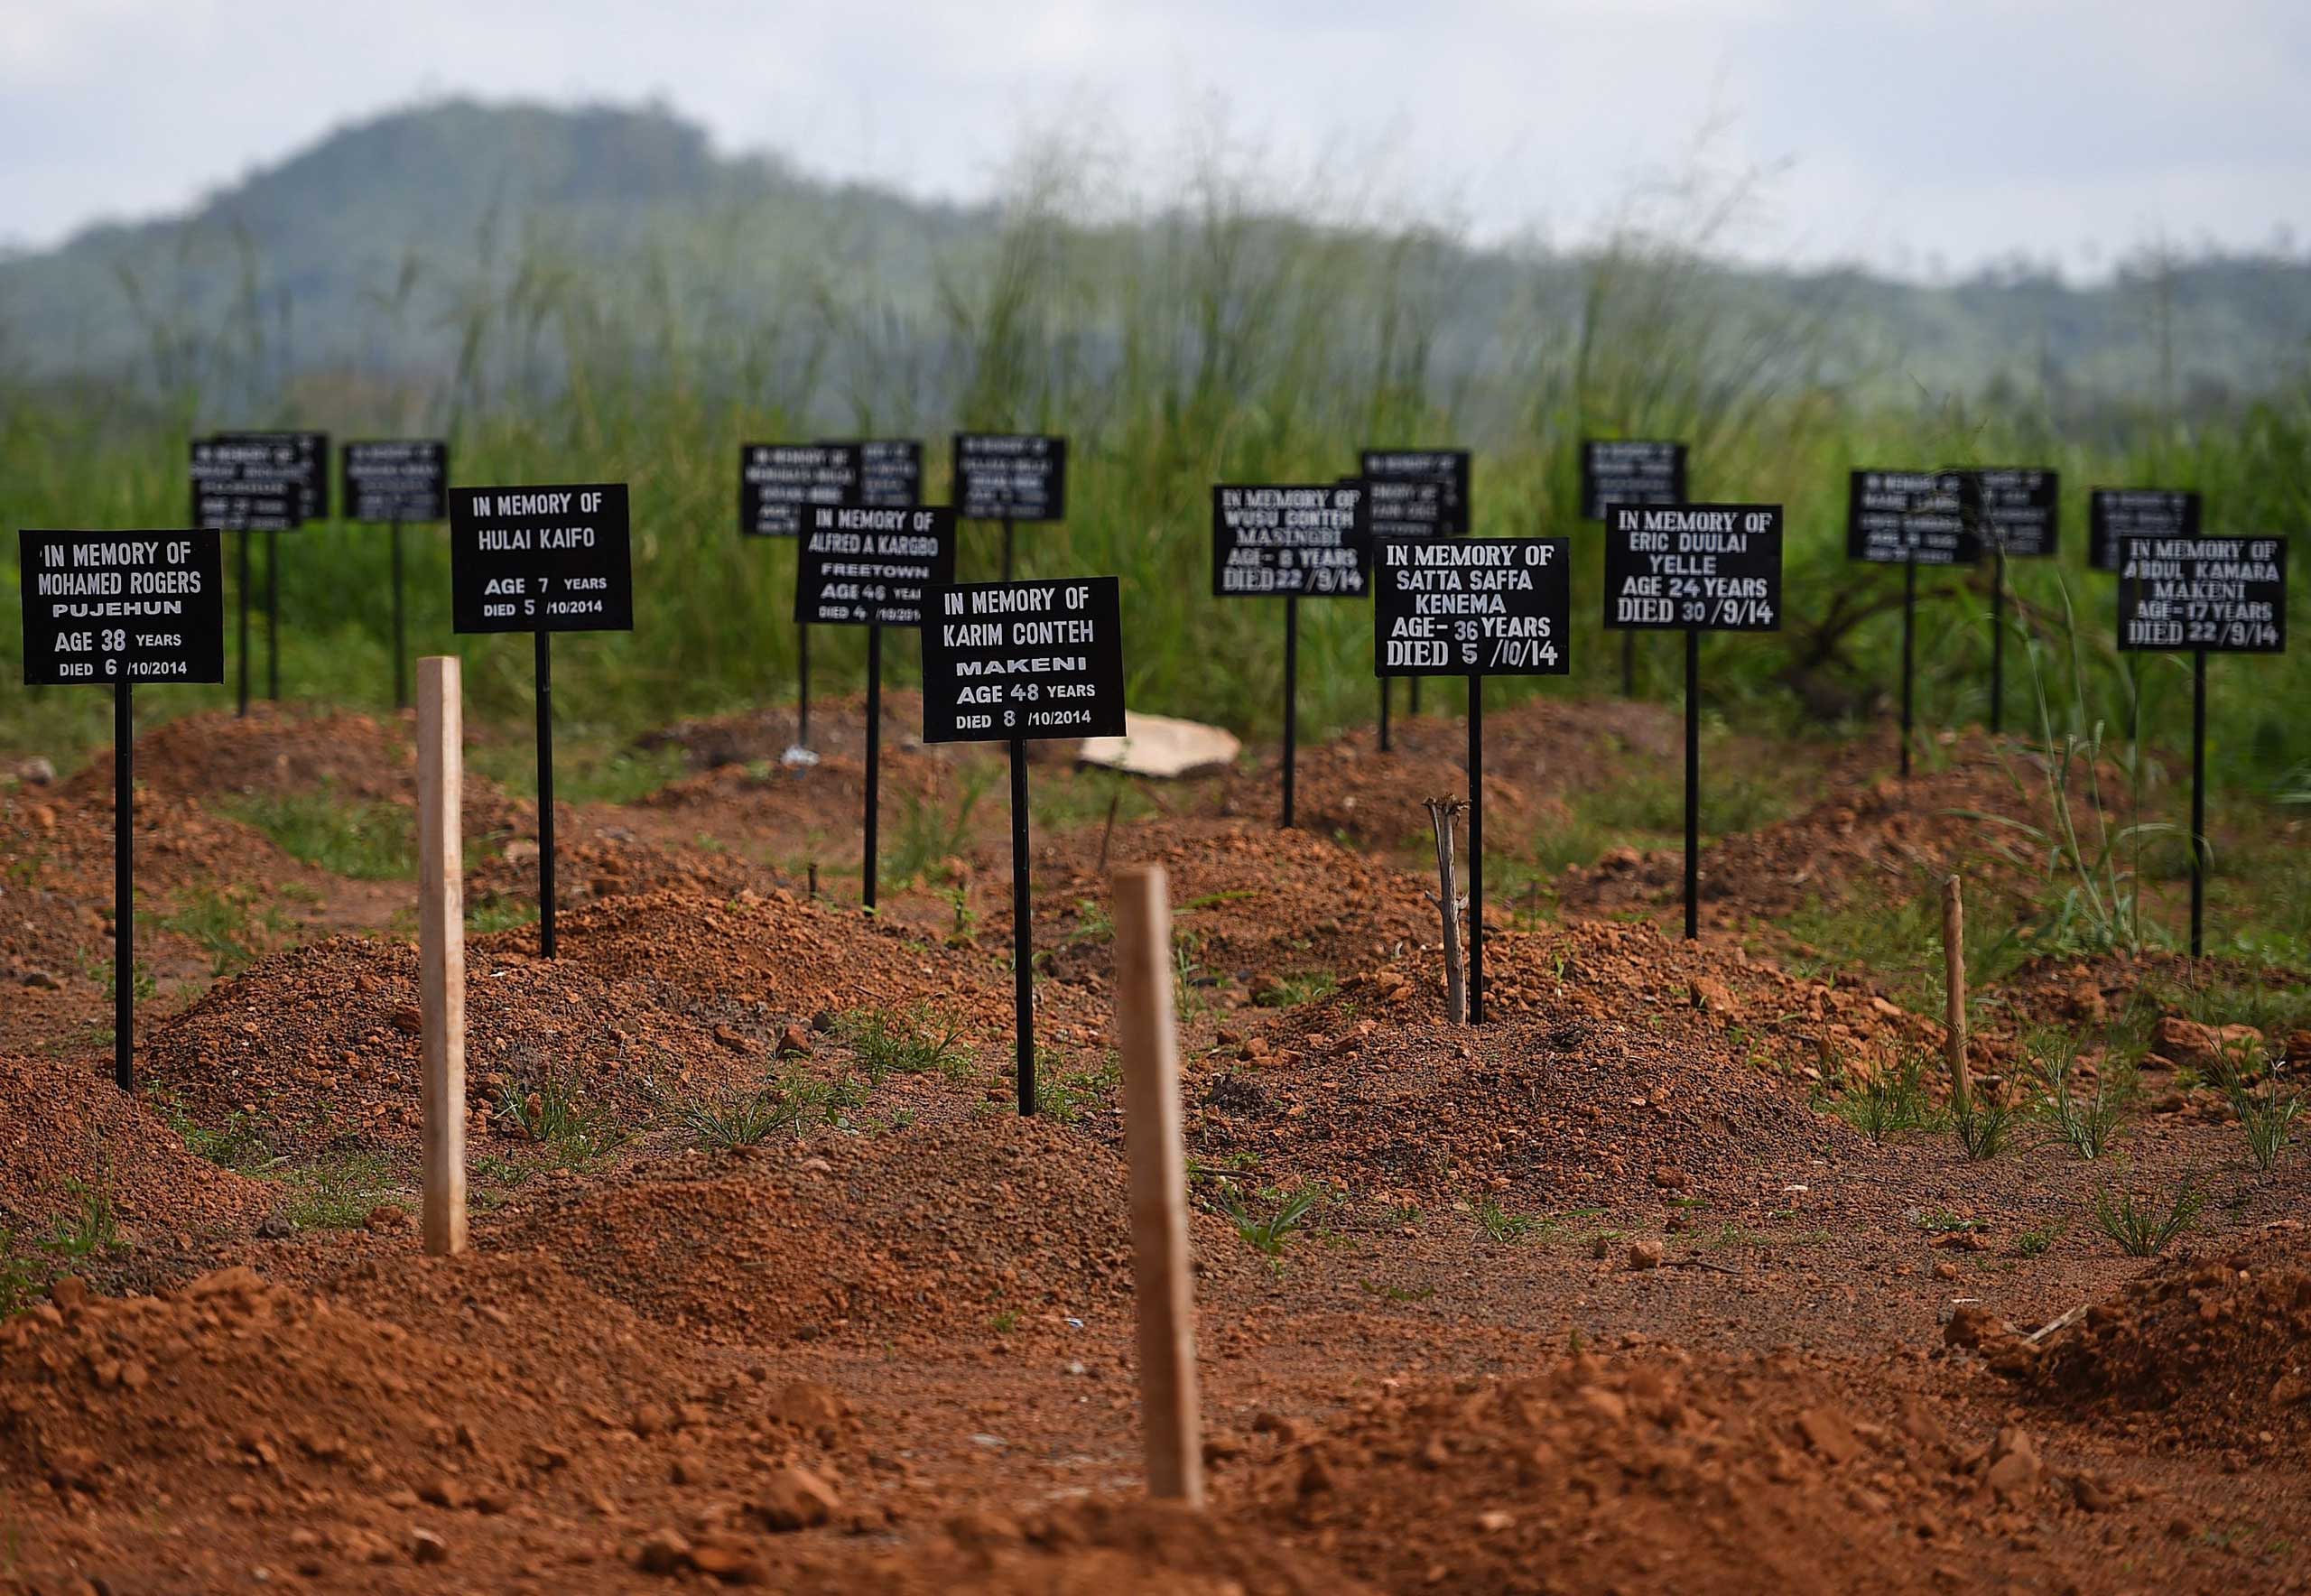 A cemetery at the Kenama Ebola treatment center in Sierra Leone run by the Red Cross Society on Nov. 15, 2014 (Francisco Leong—AFP/Getty Images)